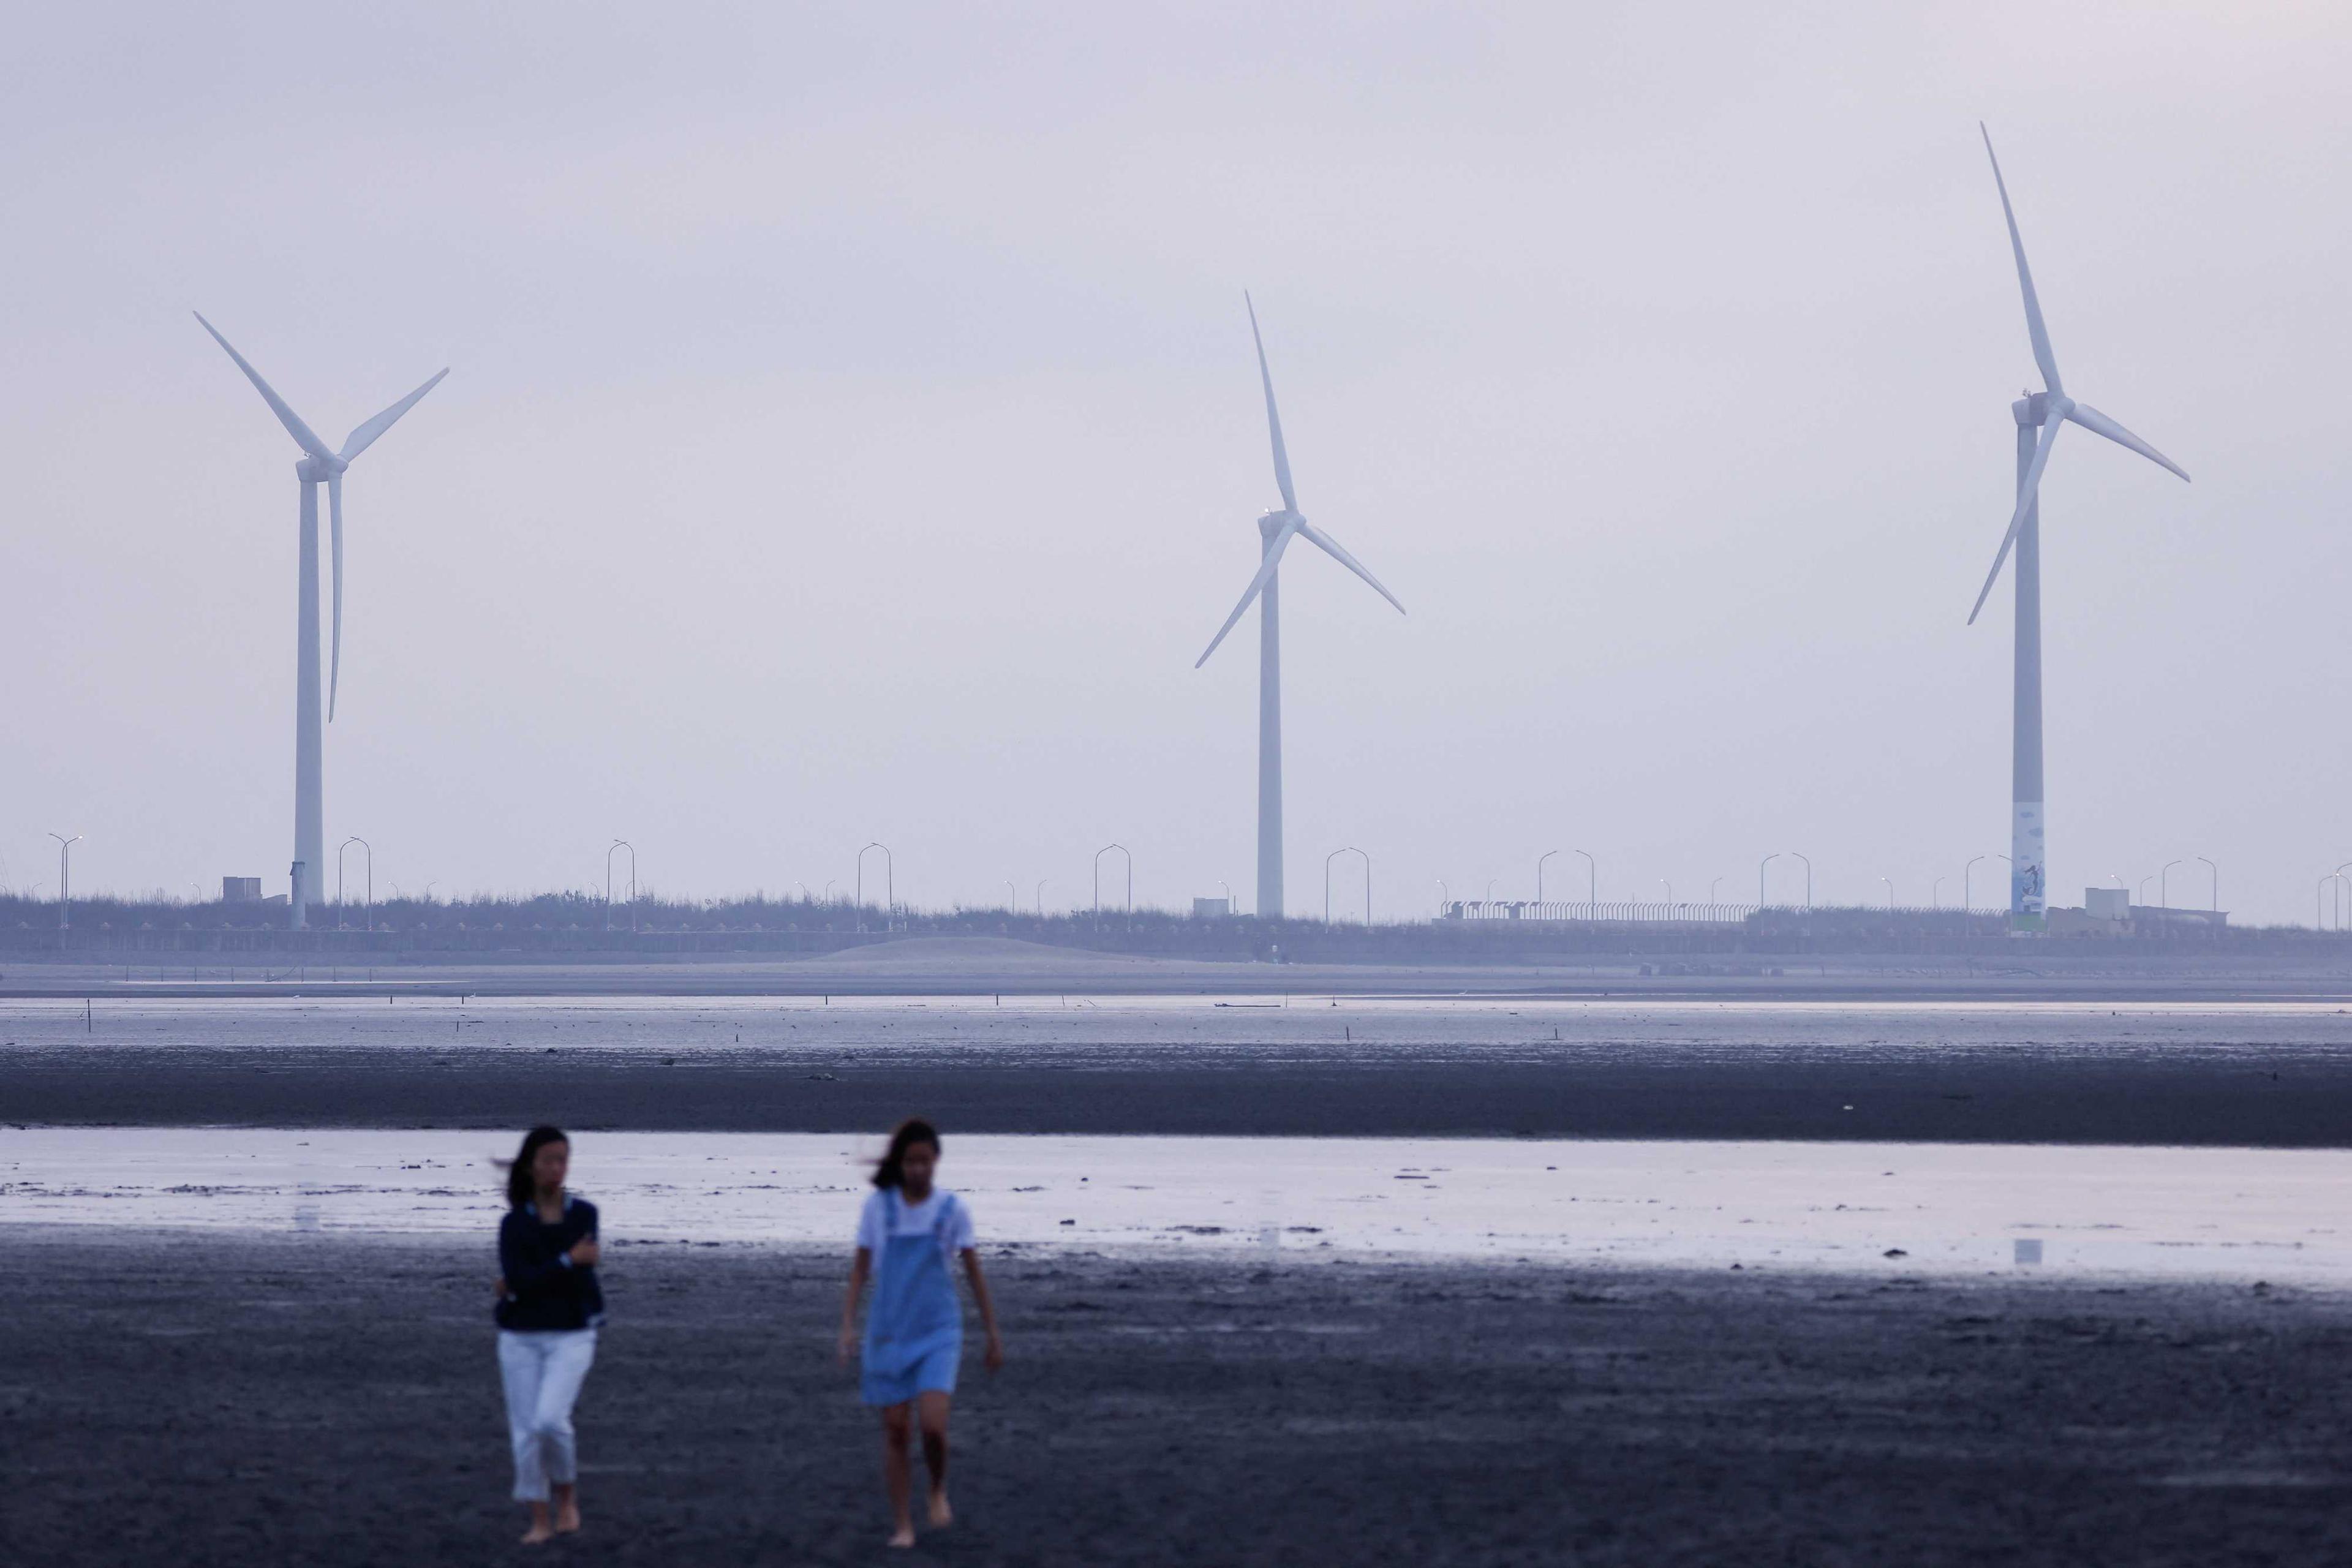 Tourists walk on the sand in front of wind turbines at Gaomei Wetlands in Taichung, Taiwan May 2. Photo: Reuters